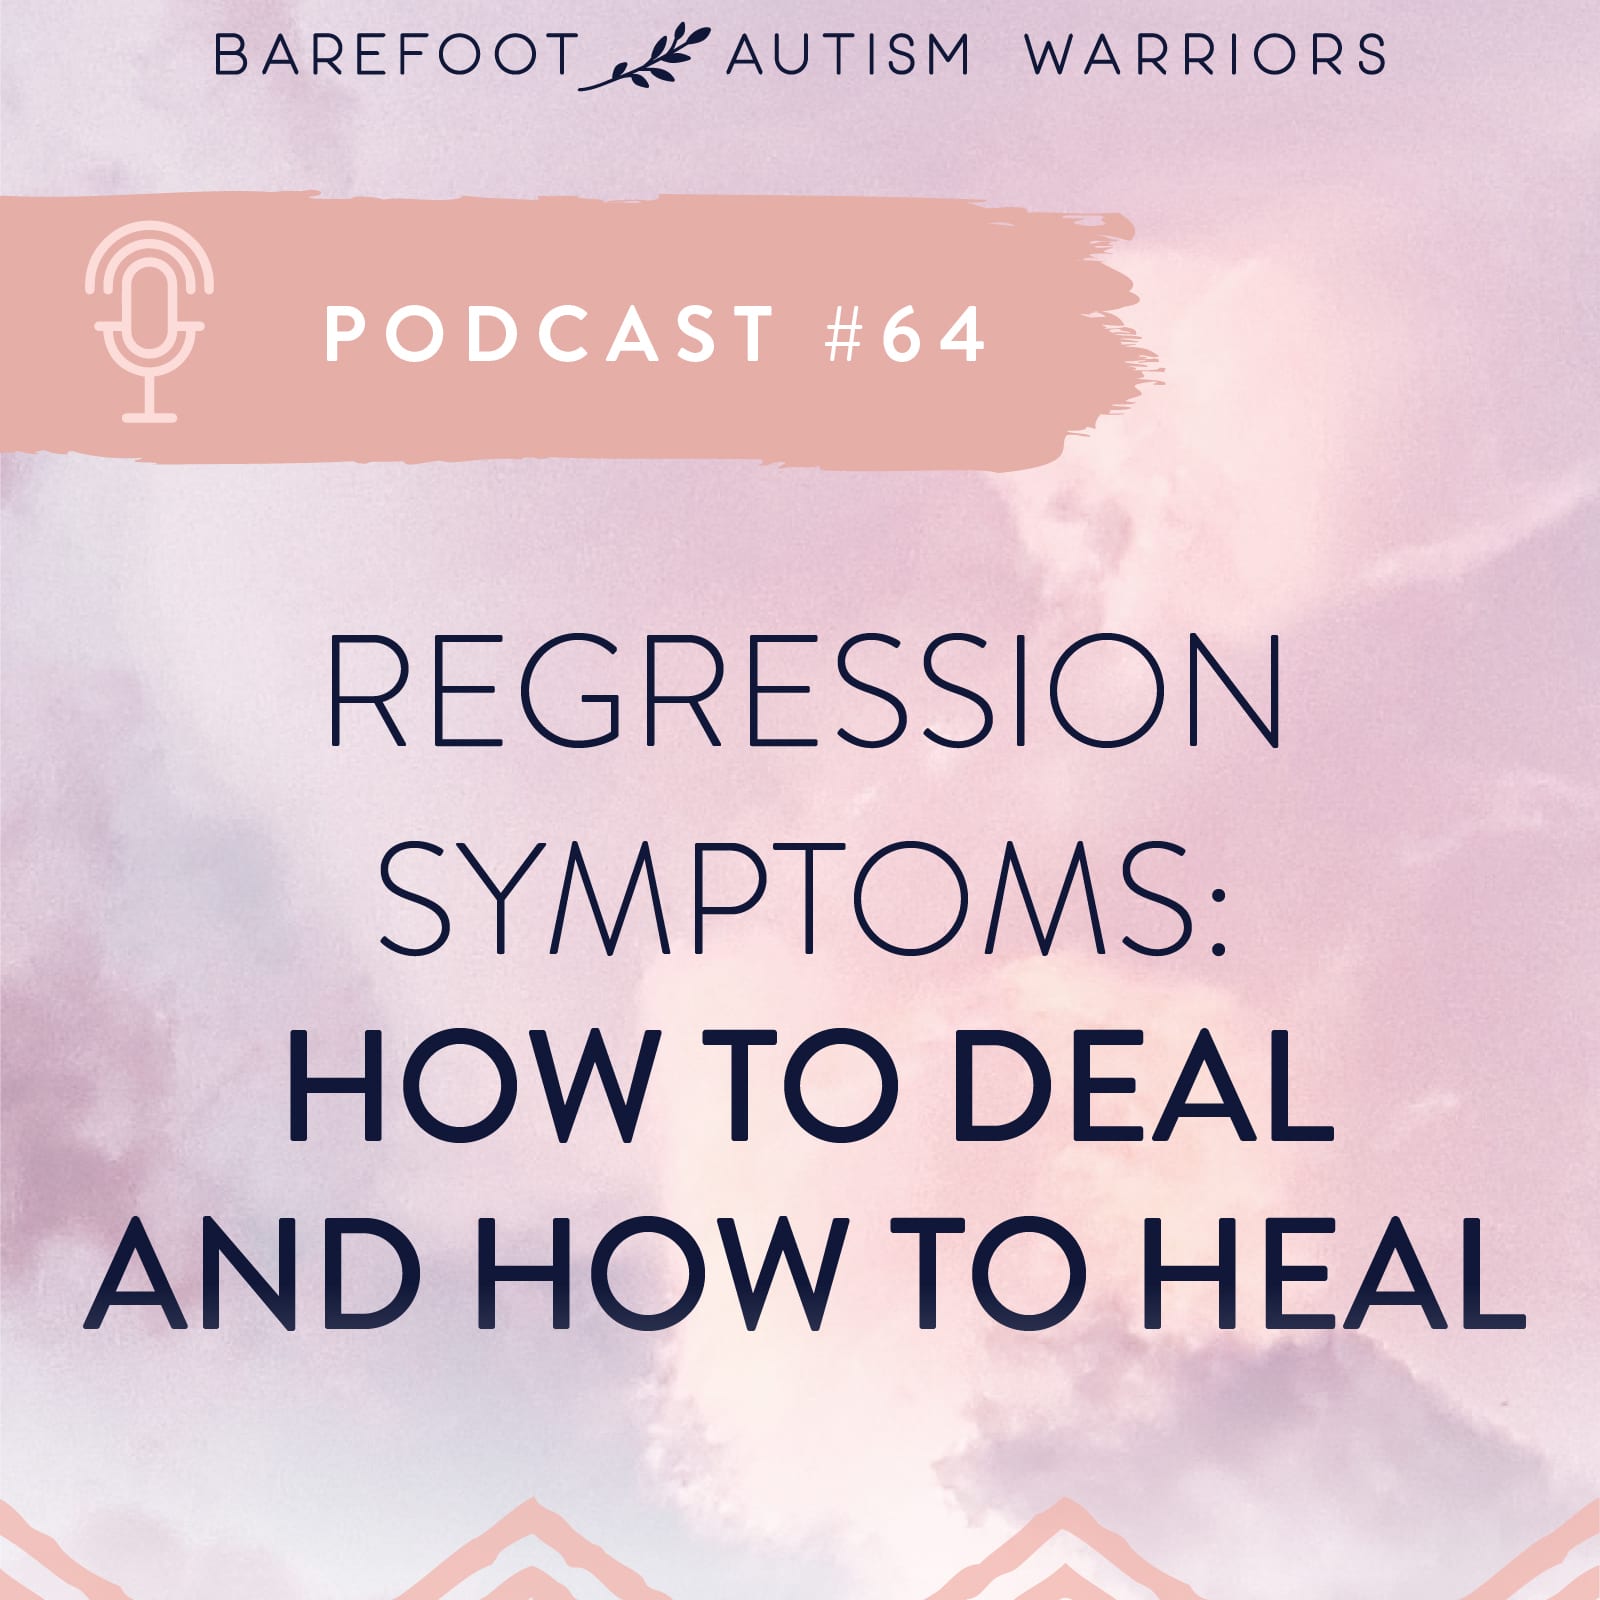 REGRESSION SYMPTOMS: HOW TO DEAL AND HOW TO HEAL